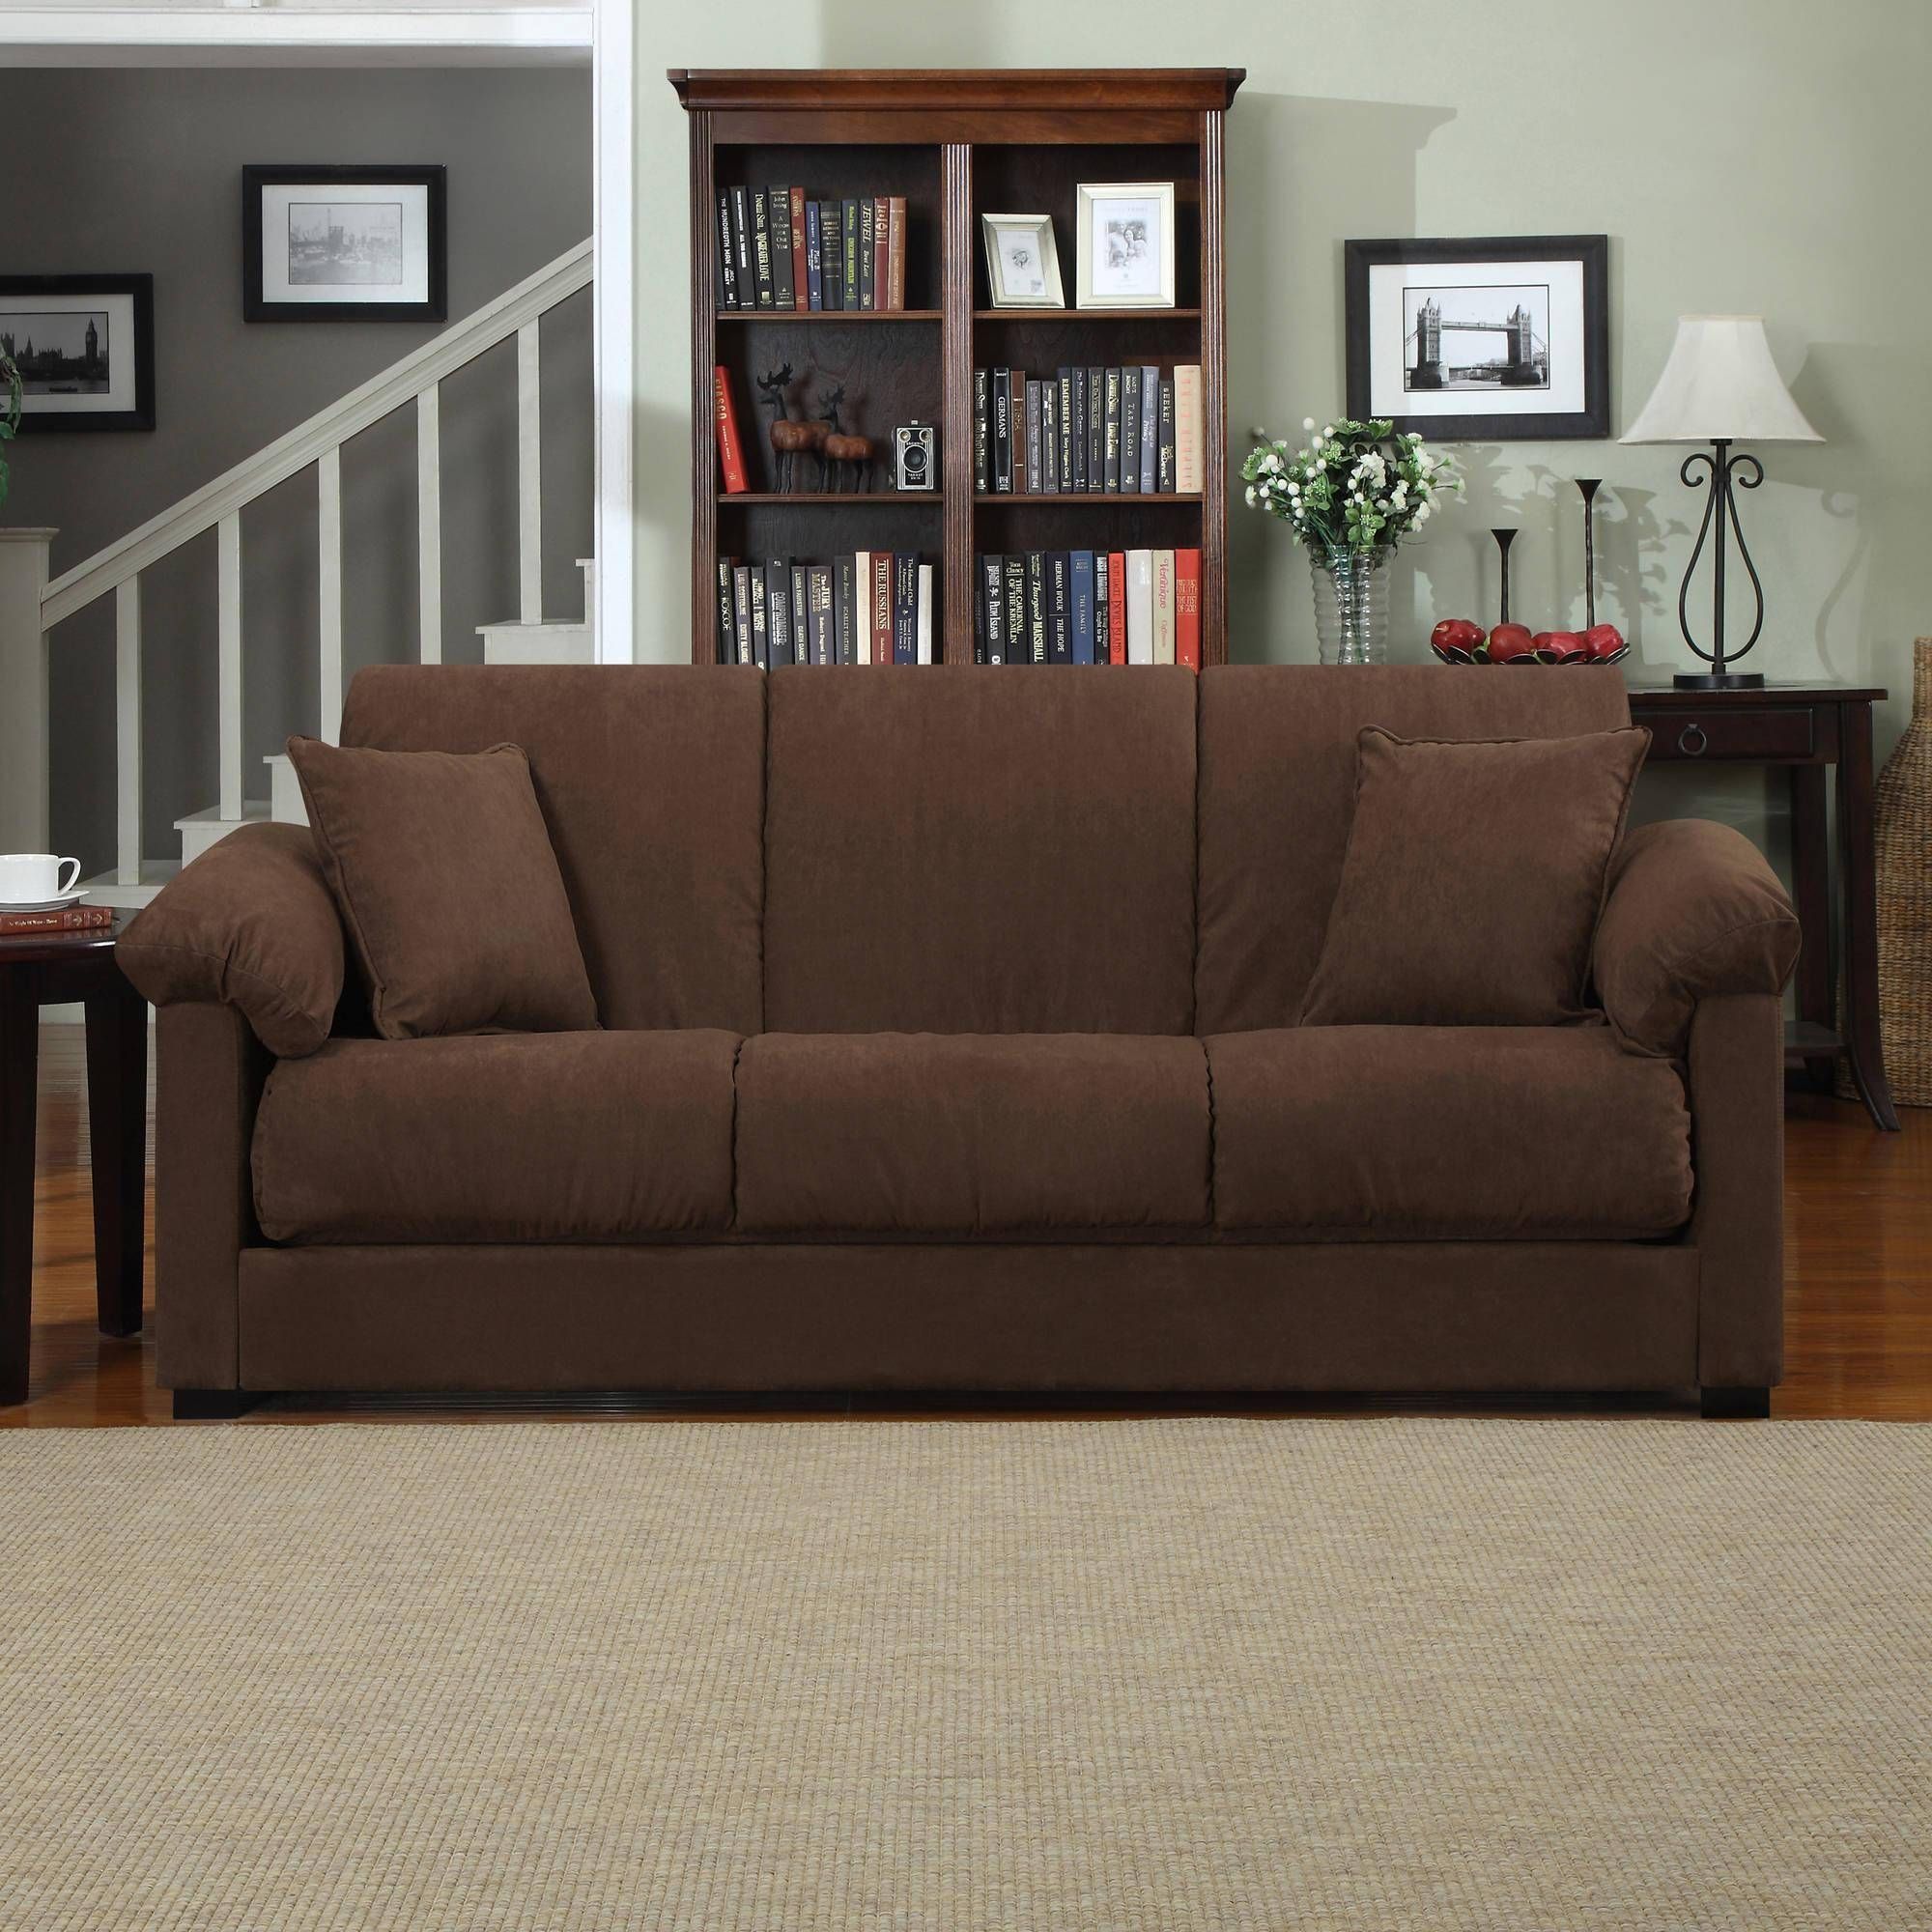 Decor: Breathtaking Target Slipcovers For Chic Home Furniture Intended For Walmart Slipcovers For Sofas (View 26 of 30)